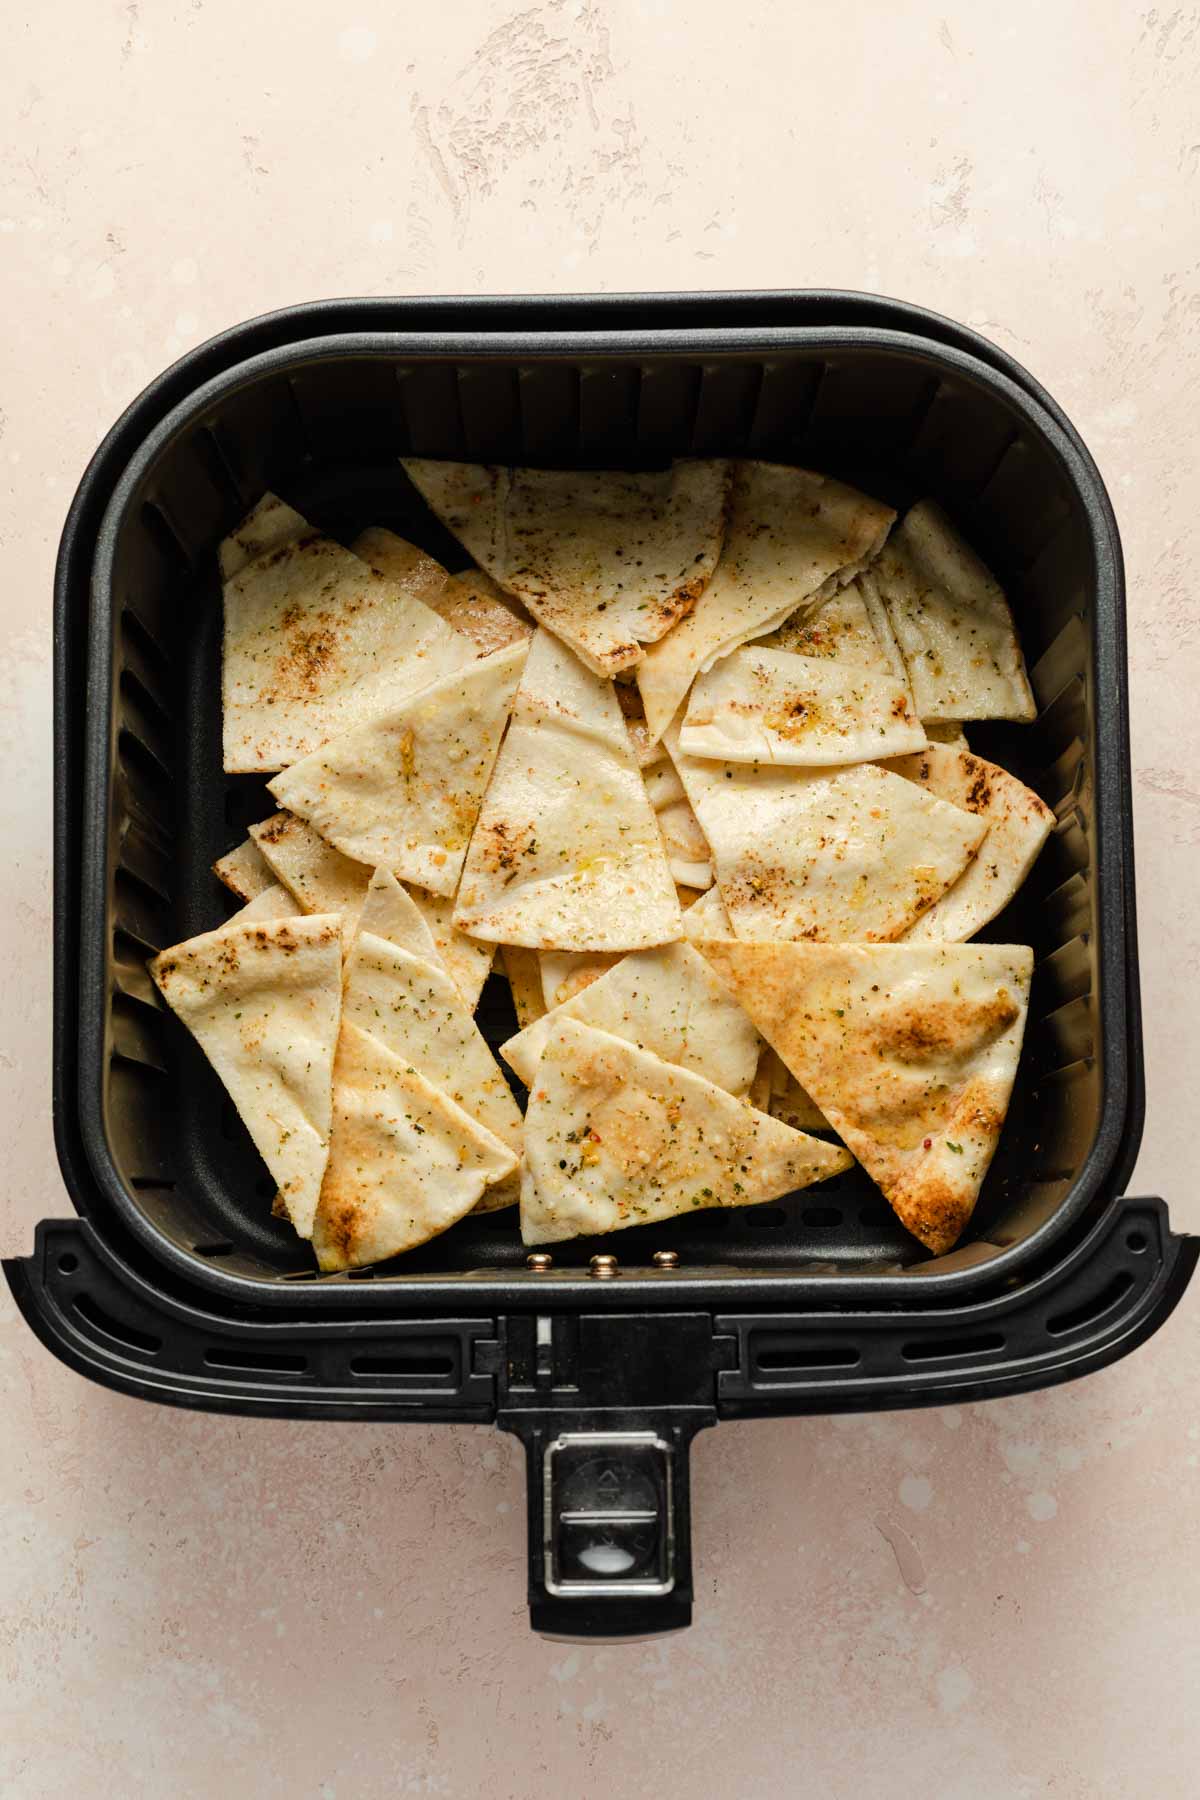 Pitas cut into triangles and placed in an air fryer basket.